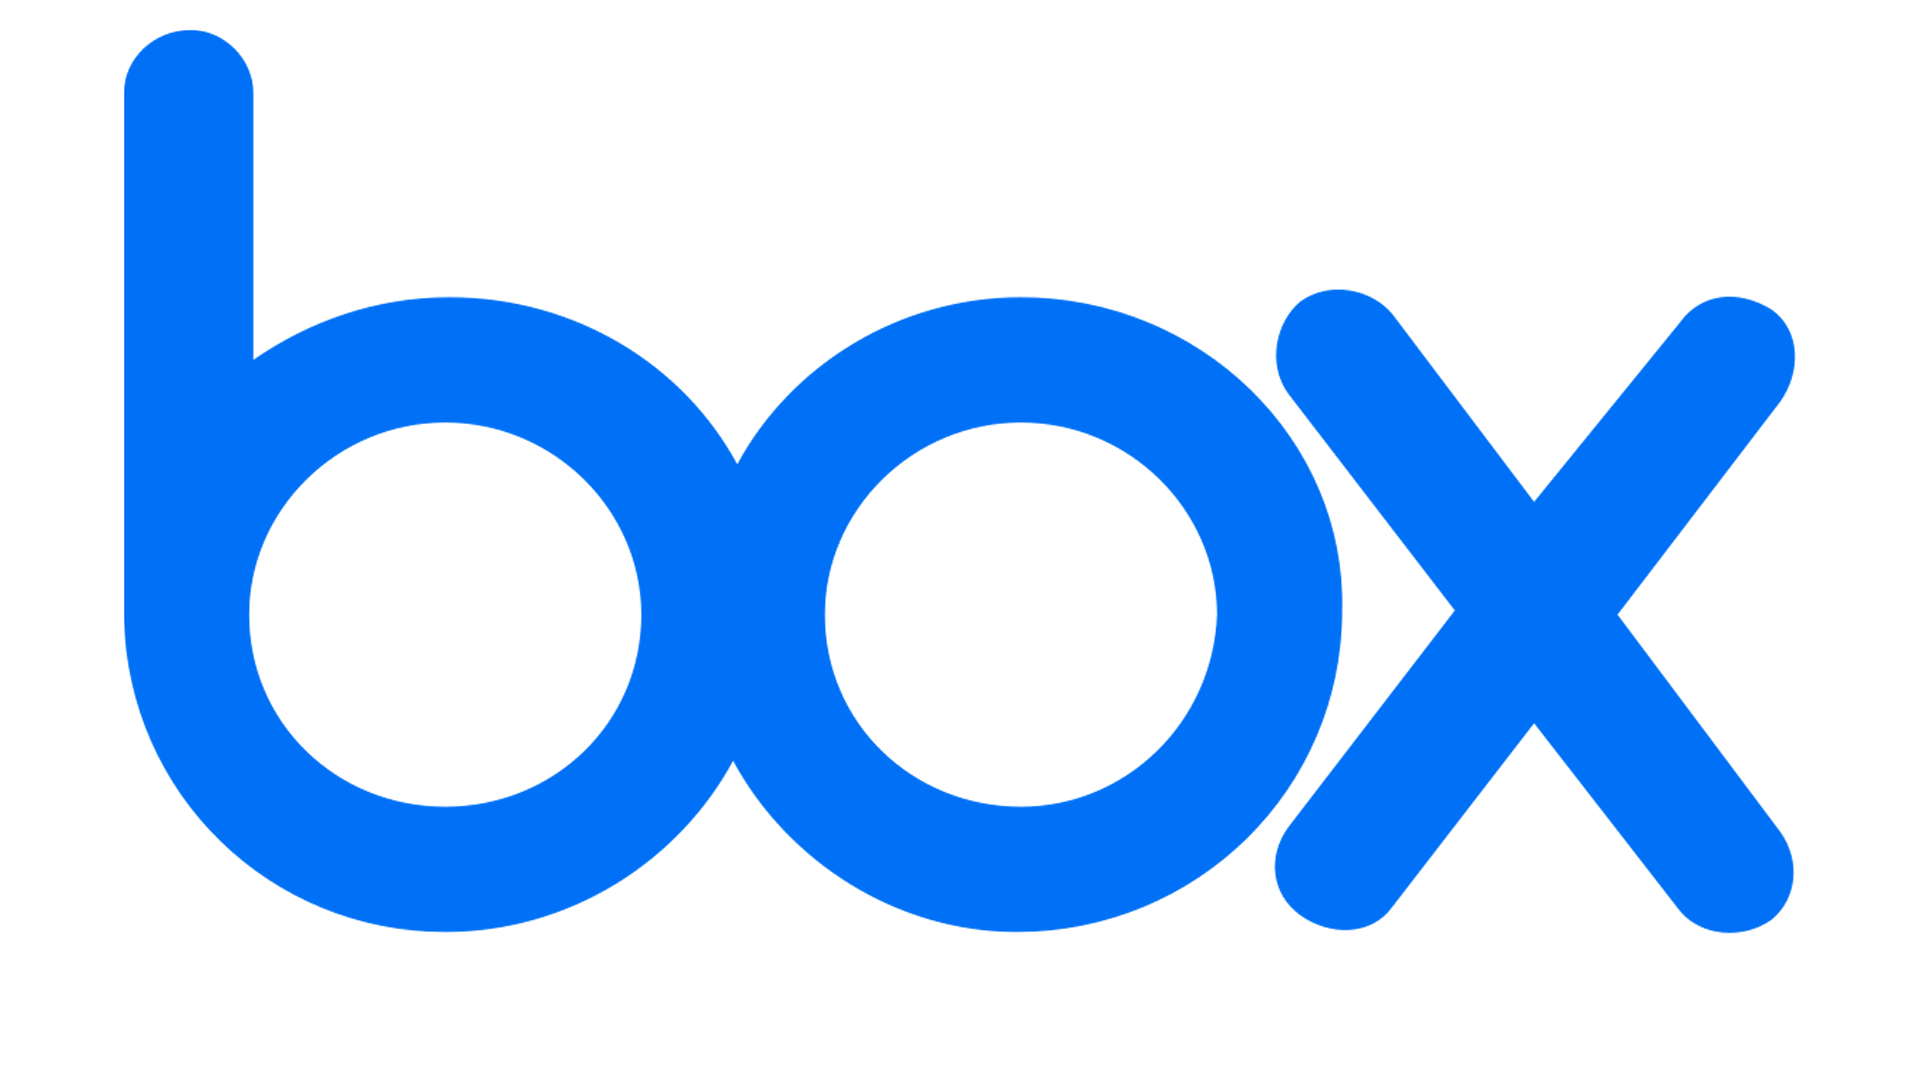 Box - Good for businesses